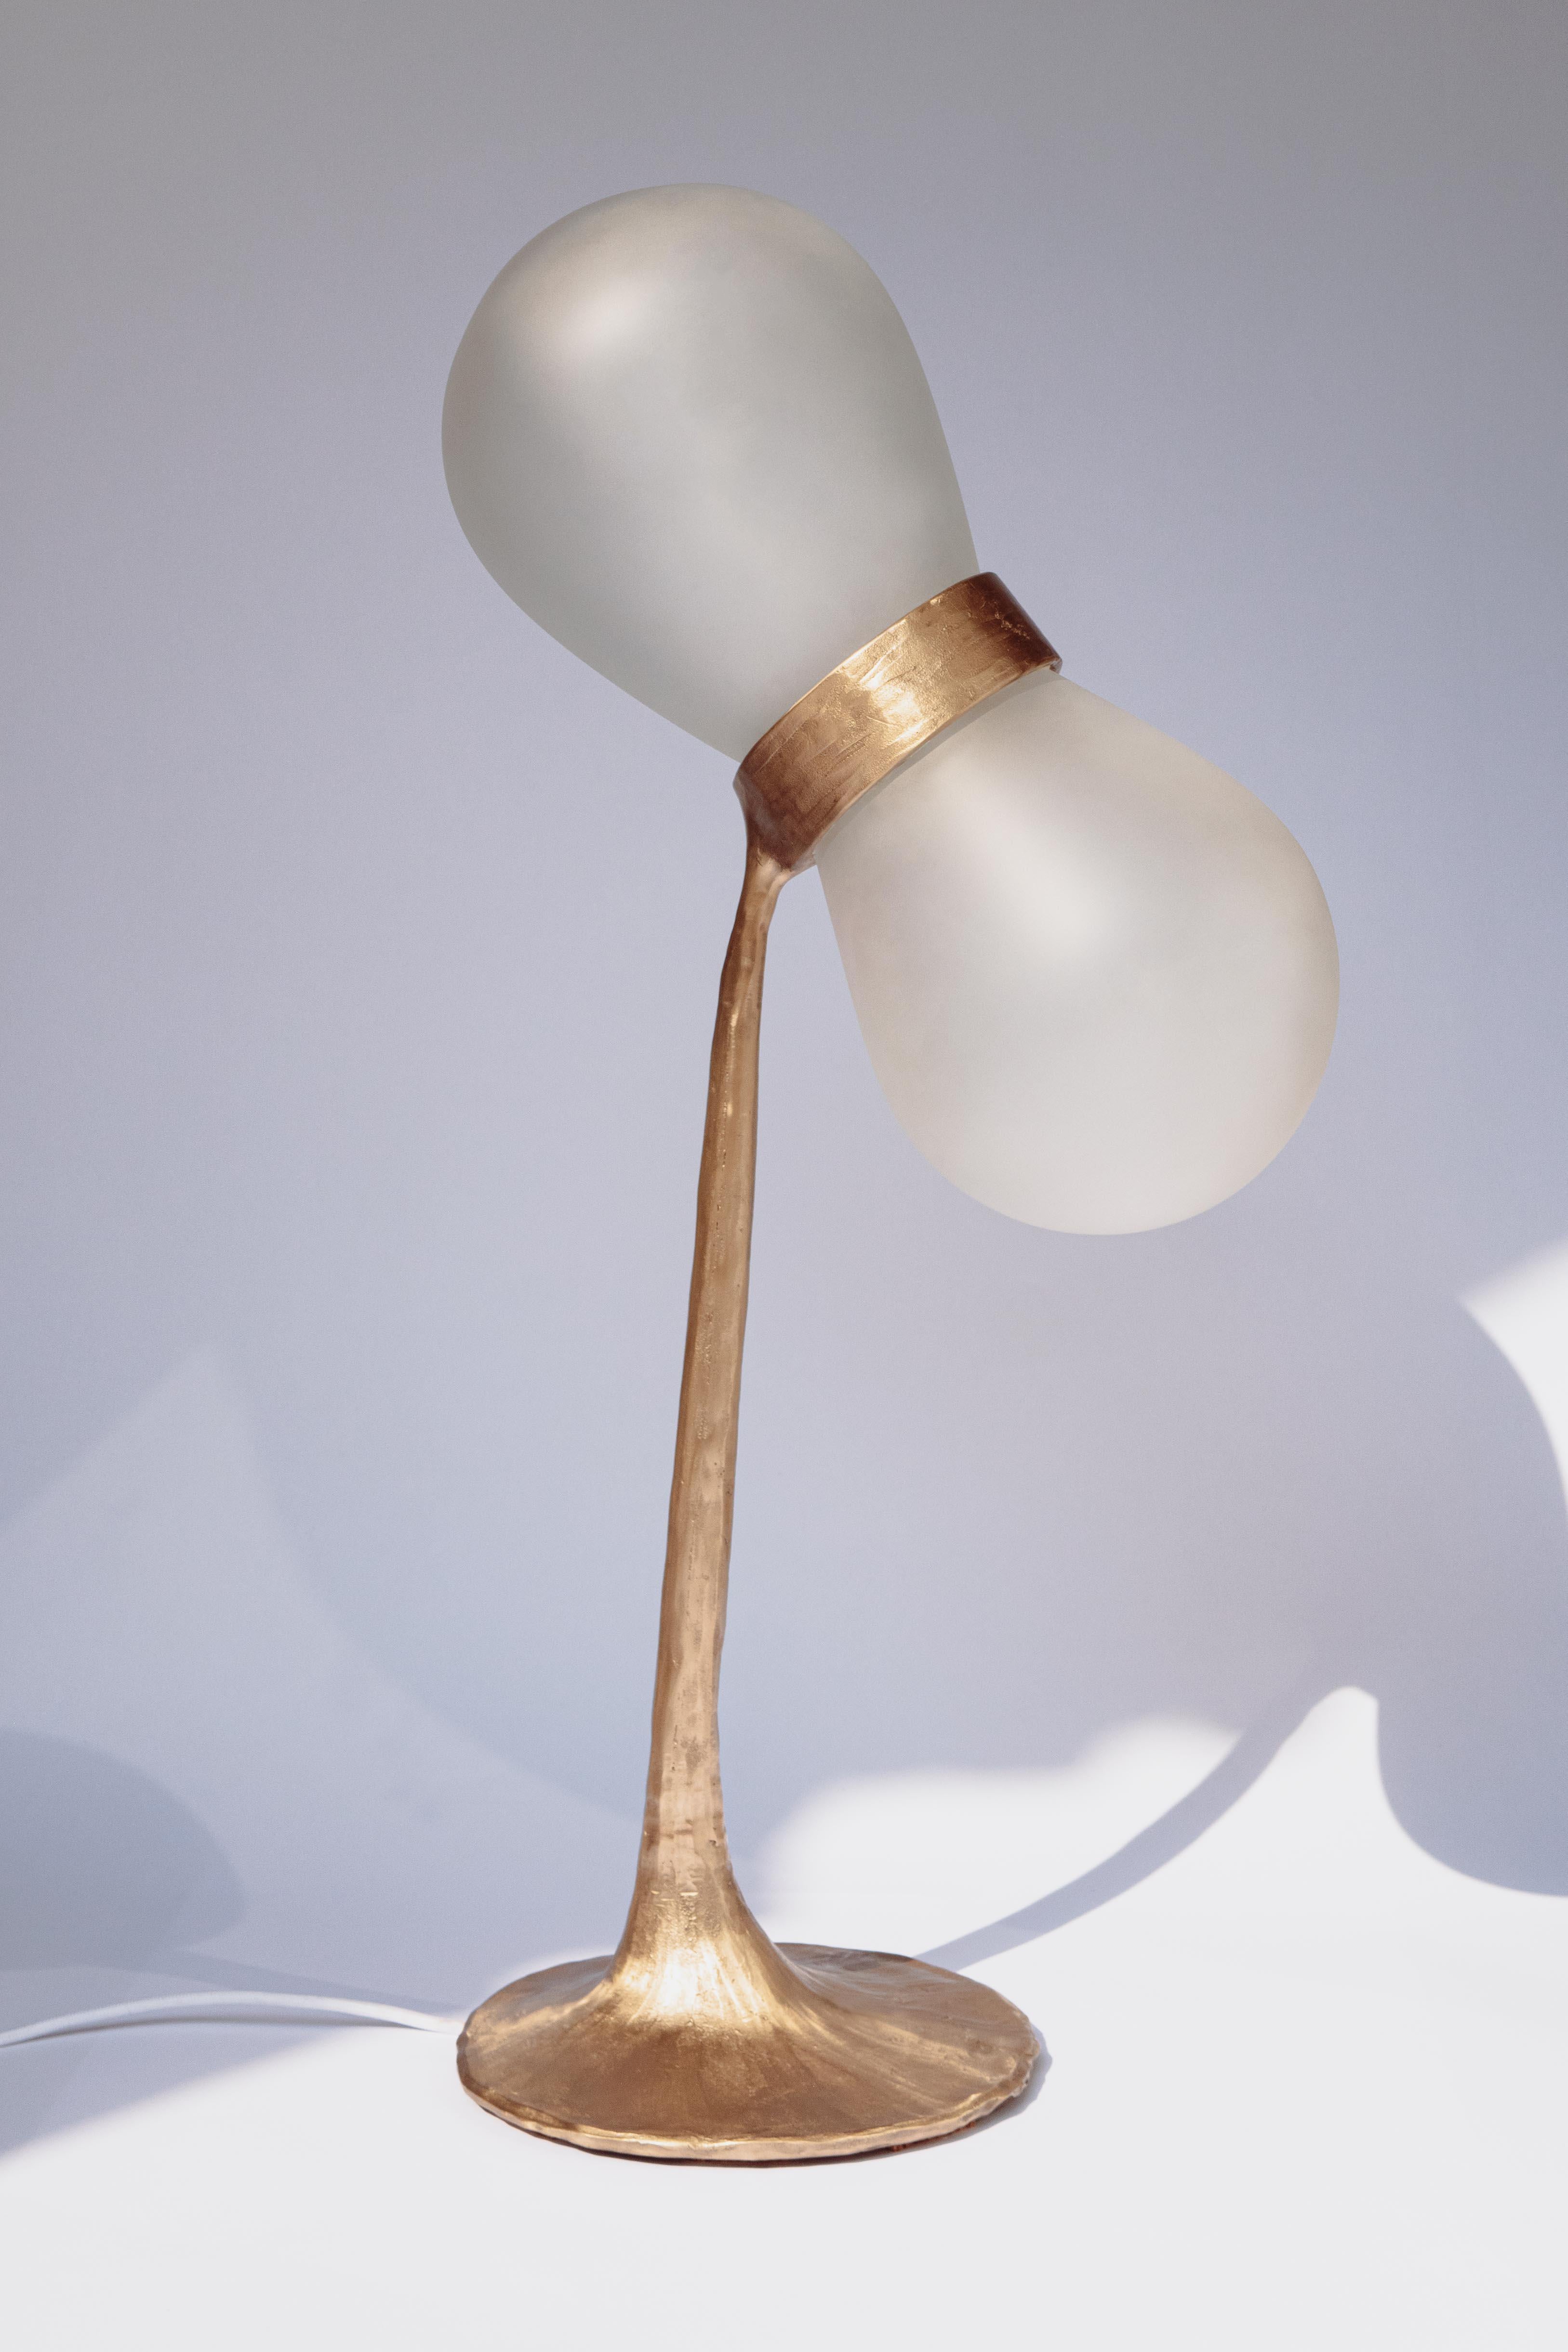 Bacupari Lamp by Clément Thevenot
Limited Edition Of 12 Pieces.
Designed by Clément Thevenot and Joyce Broussillou.
Dimensions: D 26 x W 26 x H 84,5 cm.
Materials: Cast bronze, sandblasted glass, heat-resistant plastic system, driver and 24v